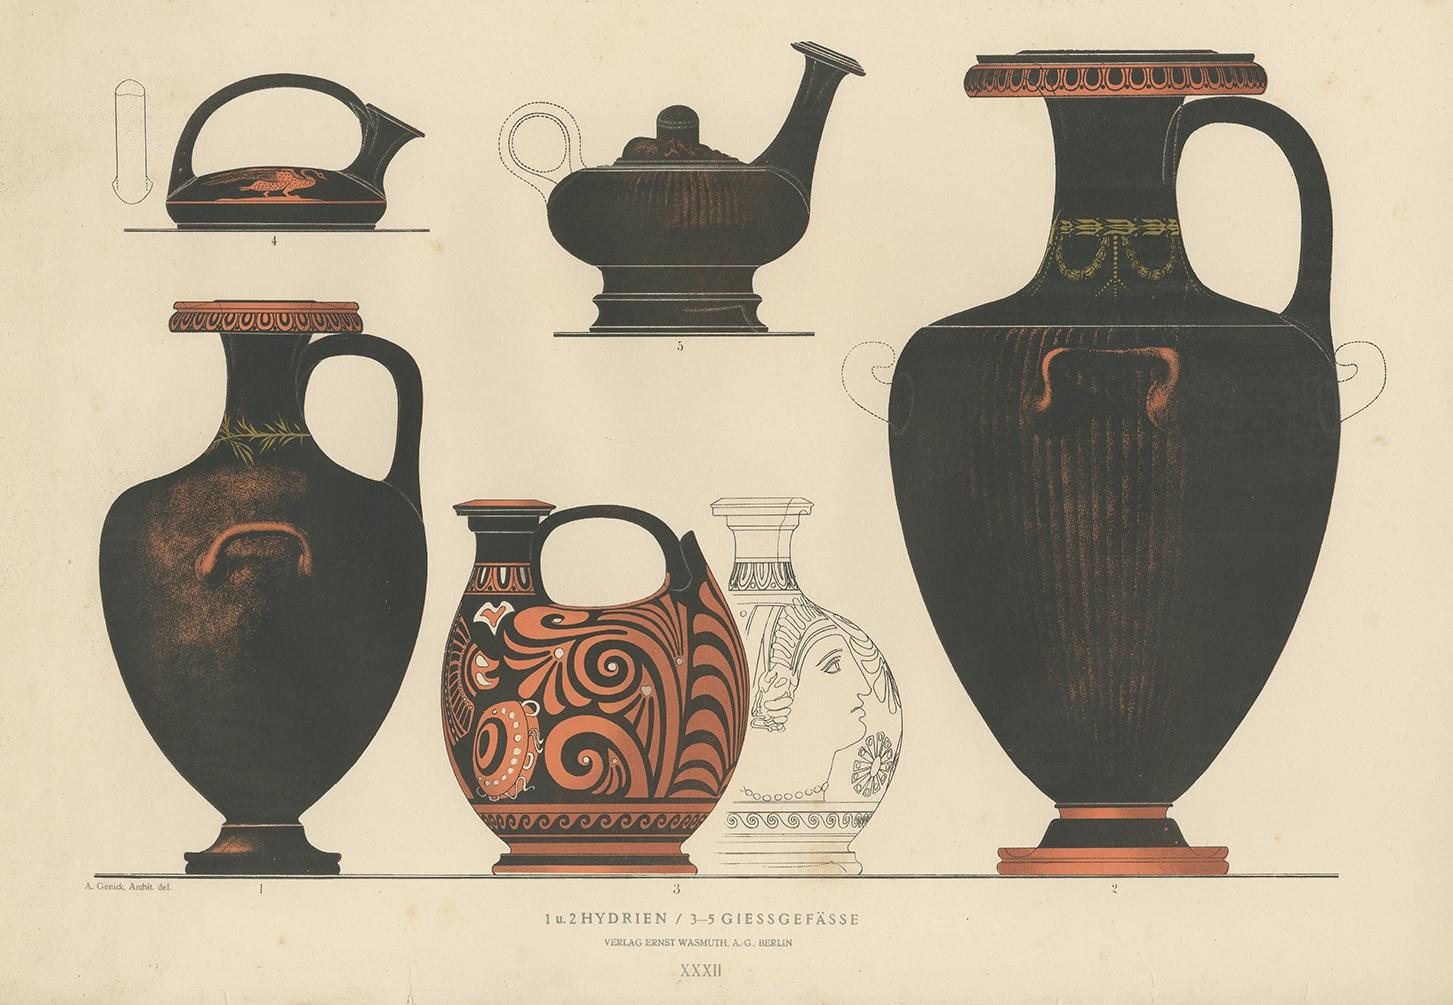 Antique print titled 'Hydrien / Giessgefässe'. Color-printed large lithograph by Ernst Wasmuth depicting Greek hydria (water jars). This print originates from 'Griechische Keramik' by A. Genick. Albert Genick, an architect by training, was one of